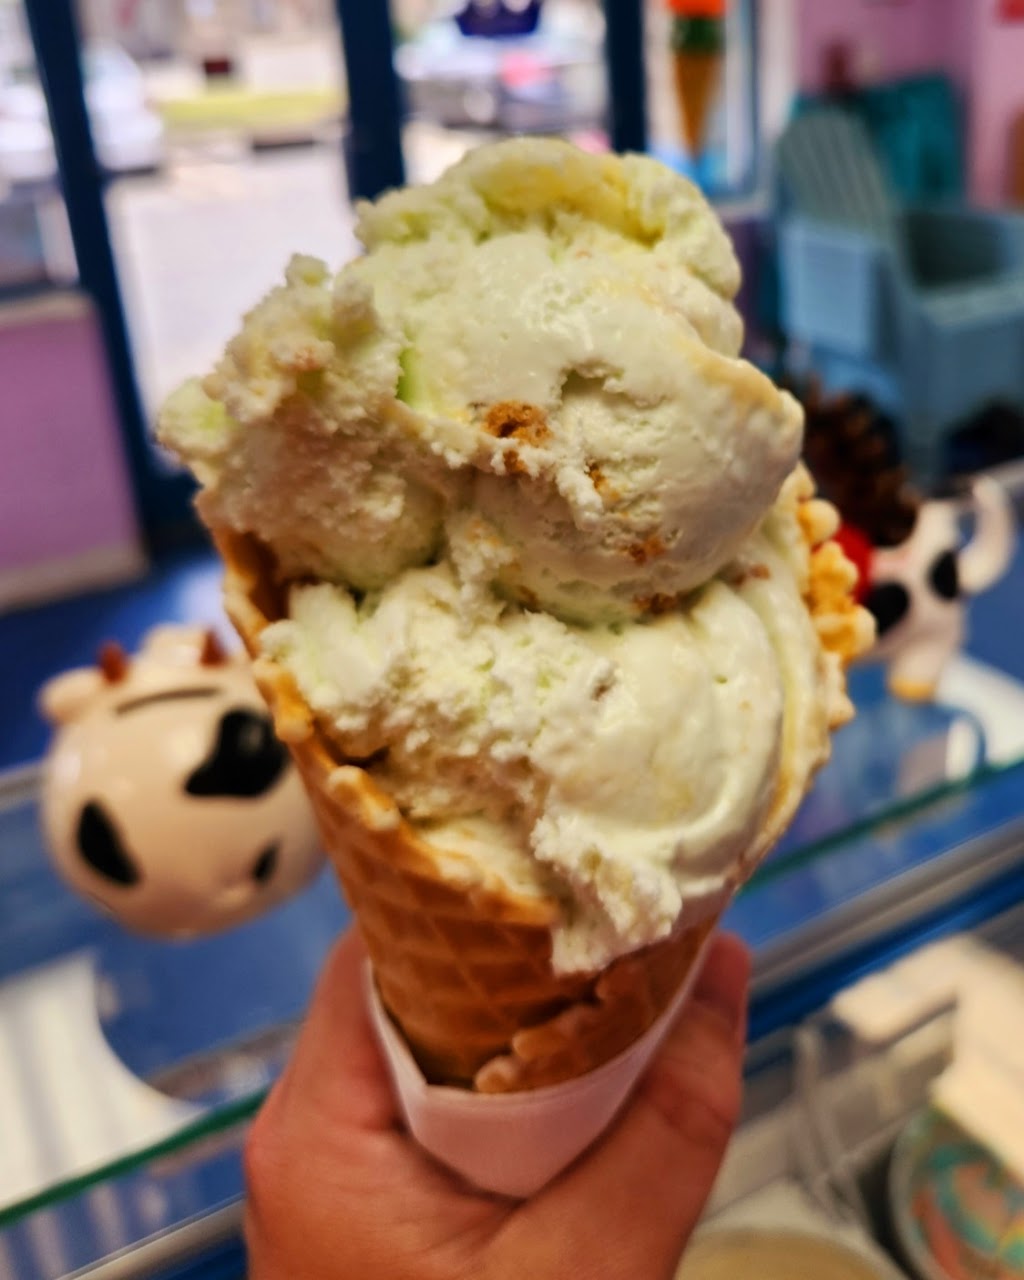 Family Farm Ice Cream | 253 Tower Dr, Middletown, NY 10941 | Phone: (845) 673-5213